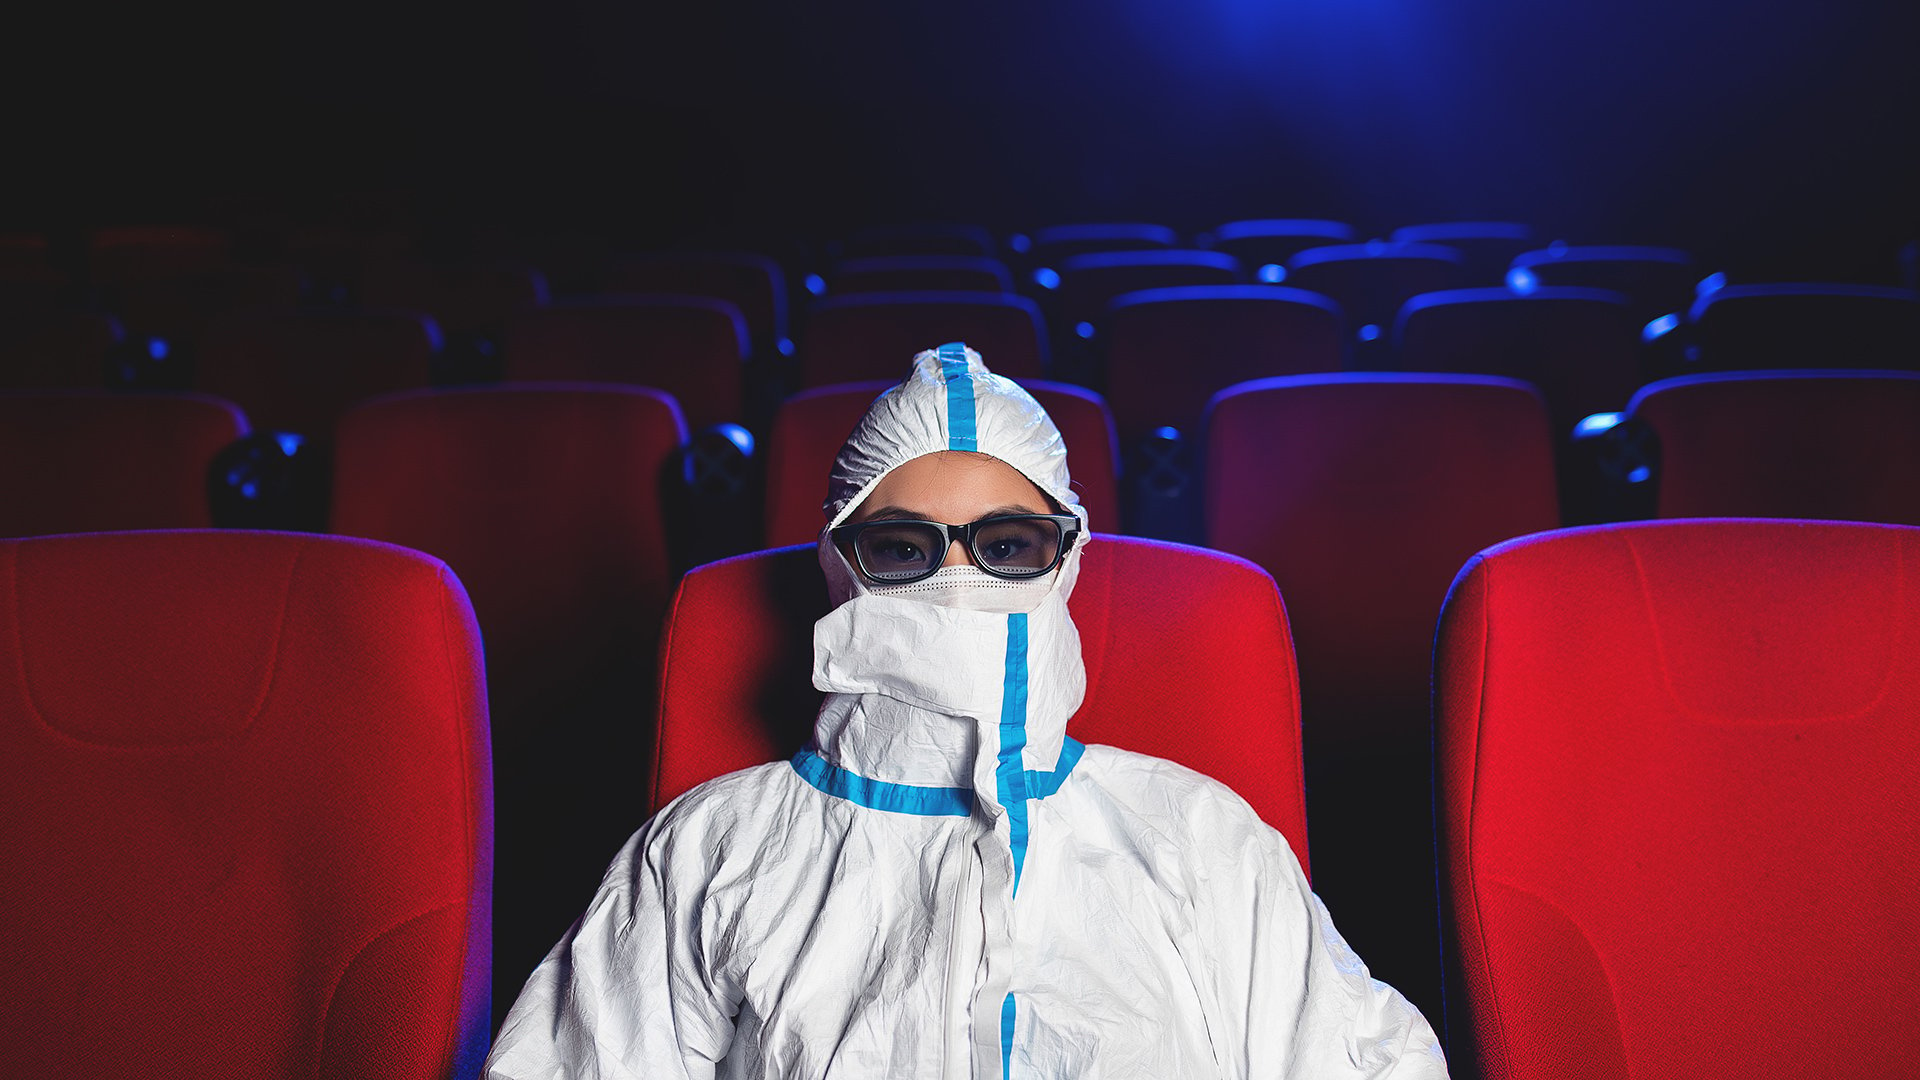 Going to cinema during Covid 19. Image: Shutterstock.